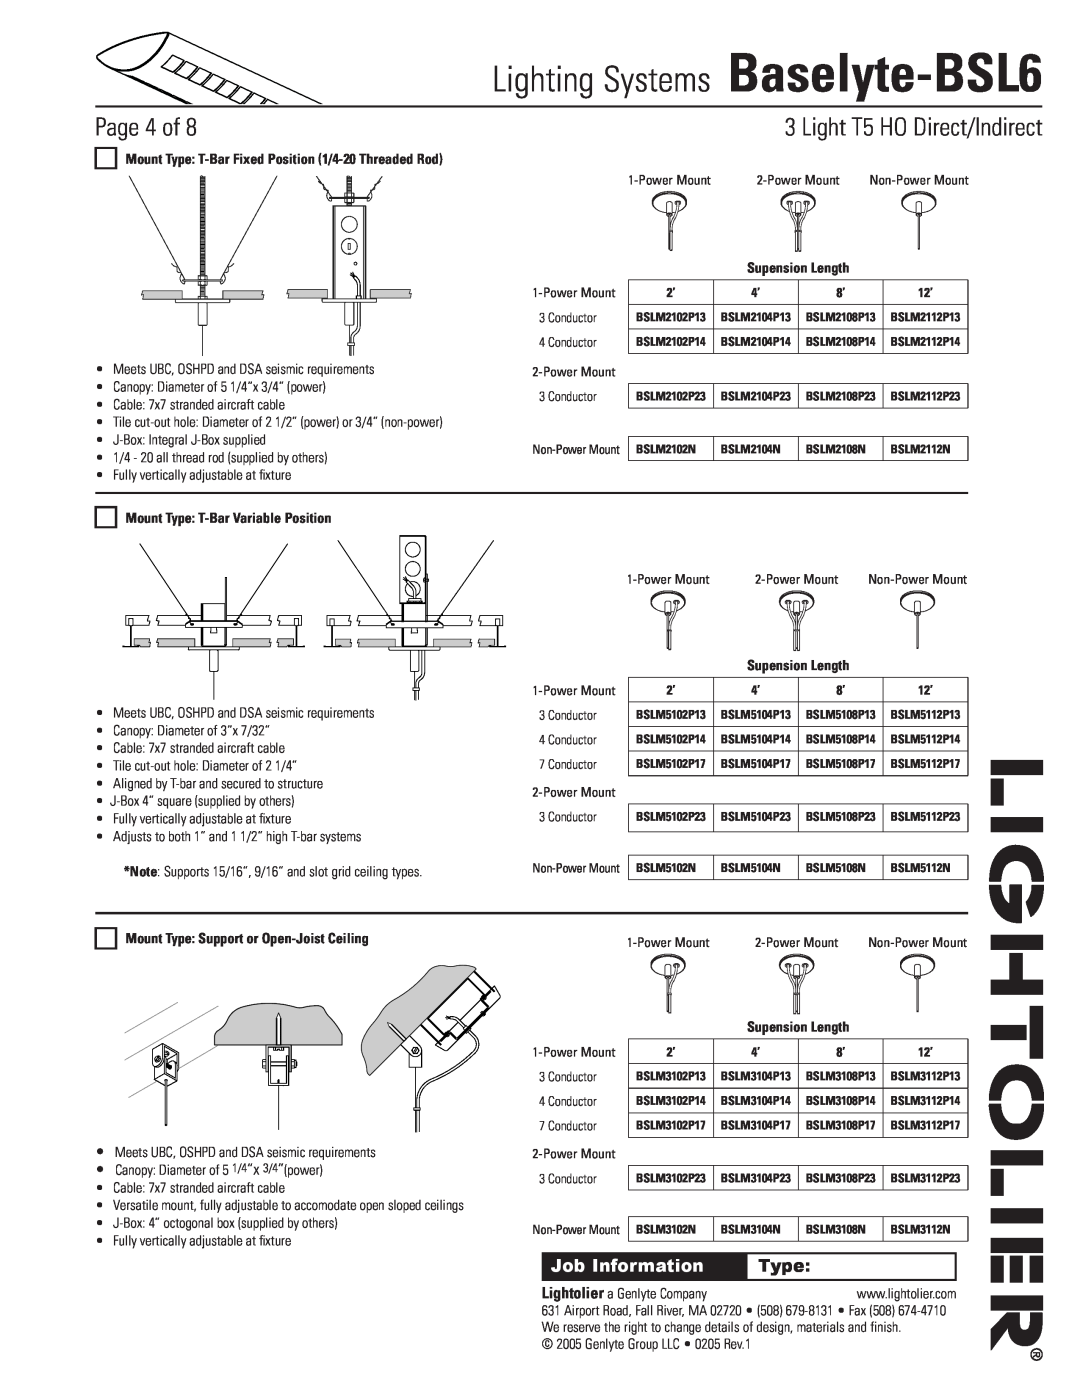 Lightolier Lighting Systems Baselyte-BSL6, Mount Type T-BarVariable Position, Mount Type Support or Open-JoistCeiling 